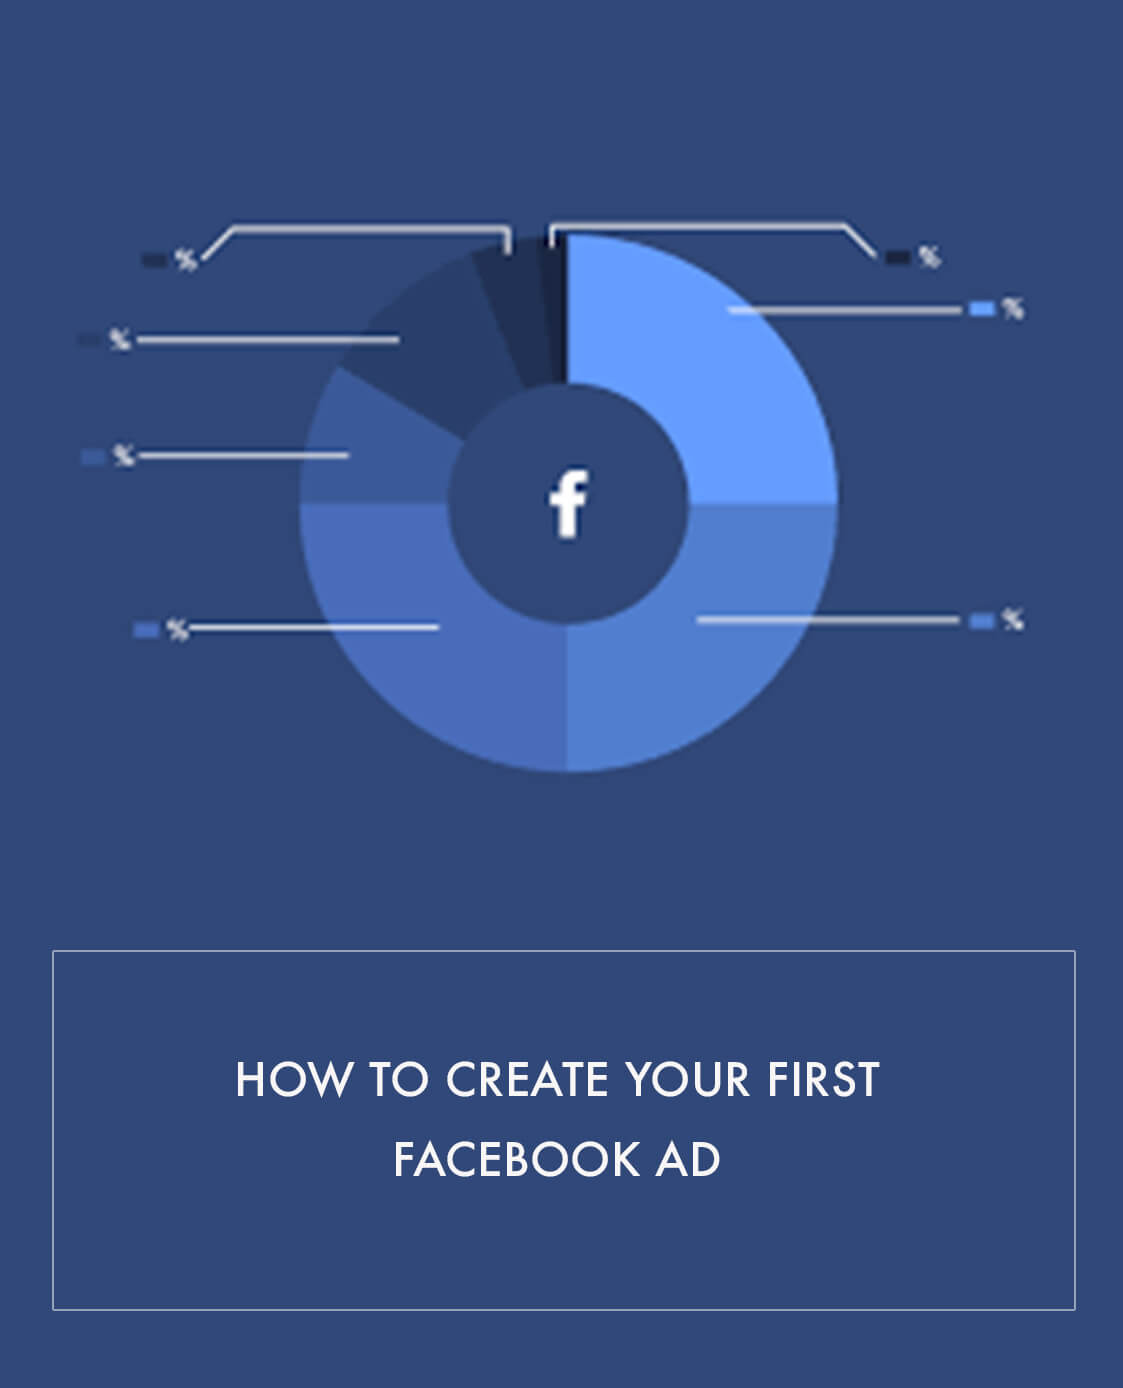 How to create your first Facebook AD